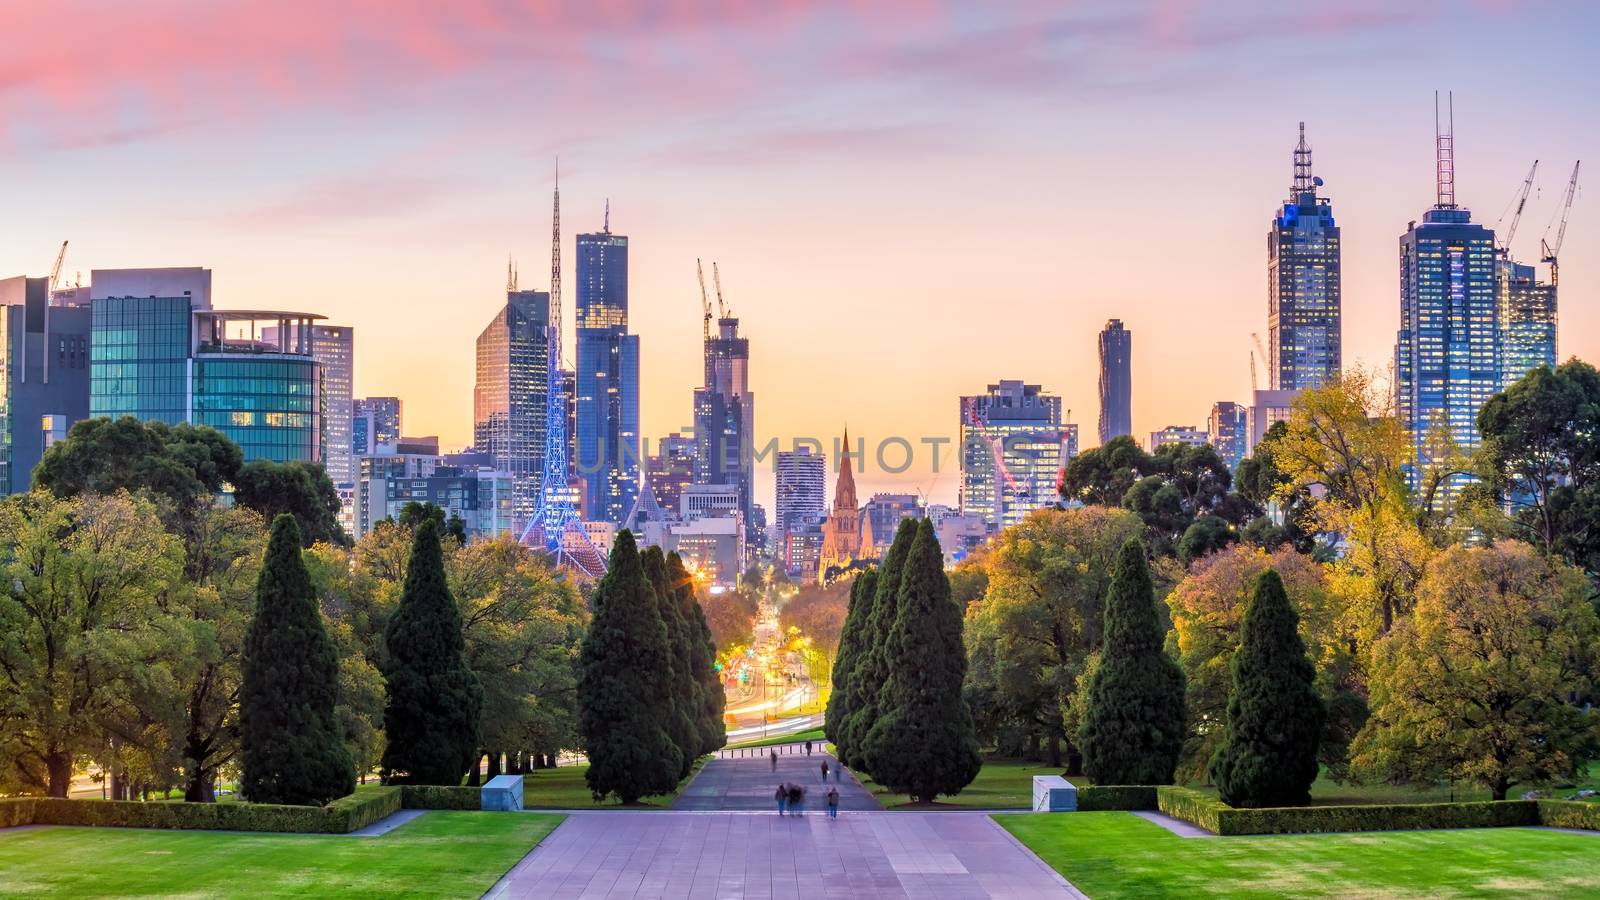 Melbourne city skyline at twilight in Australia by f11photo